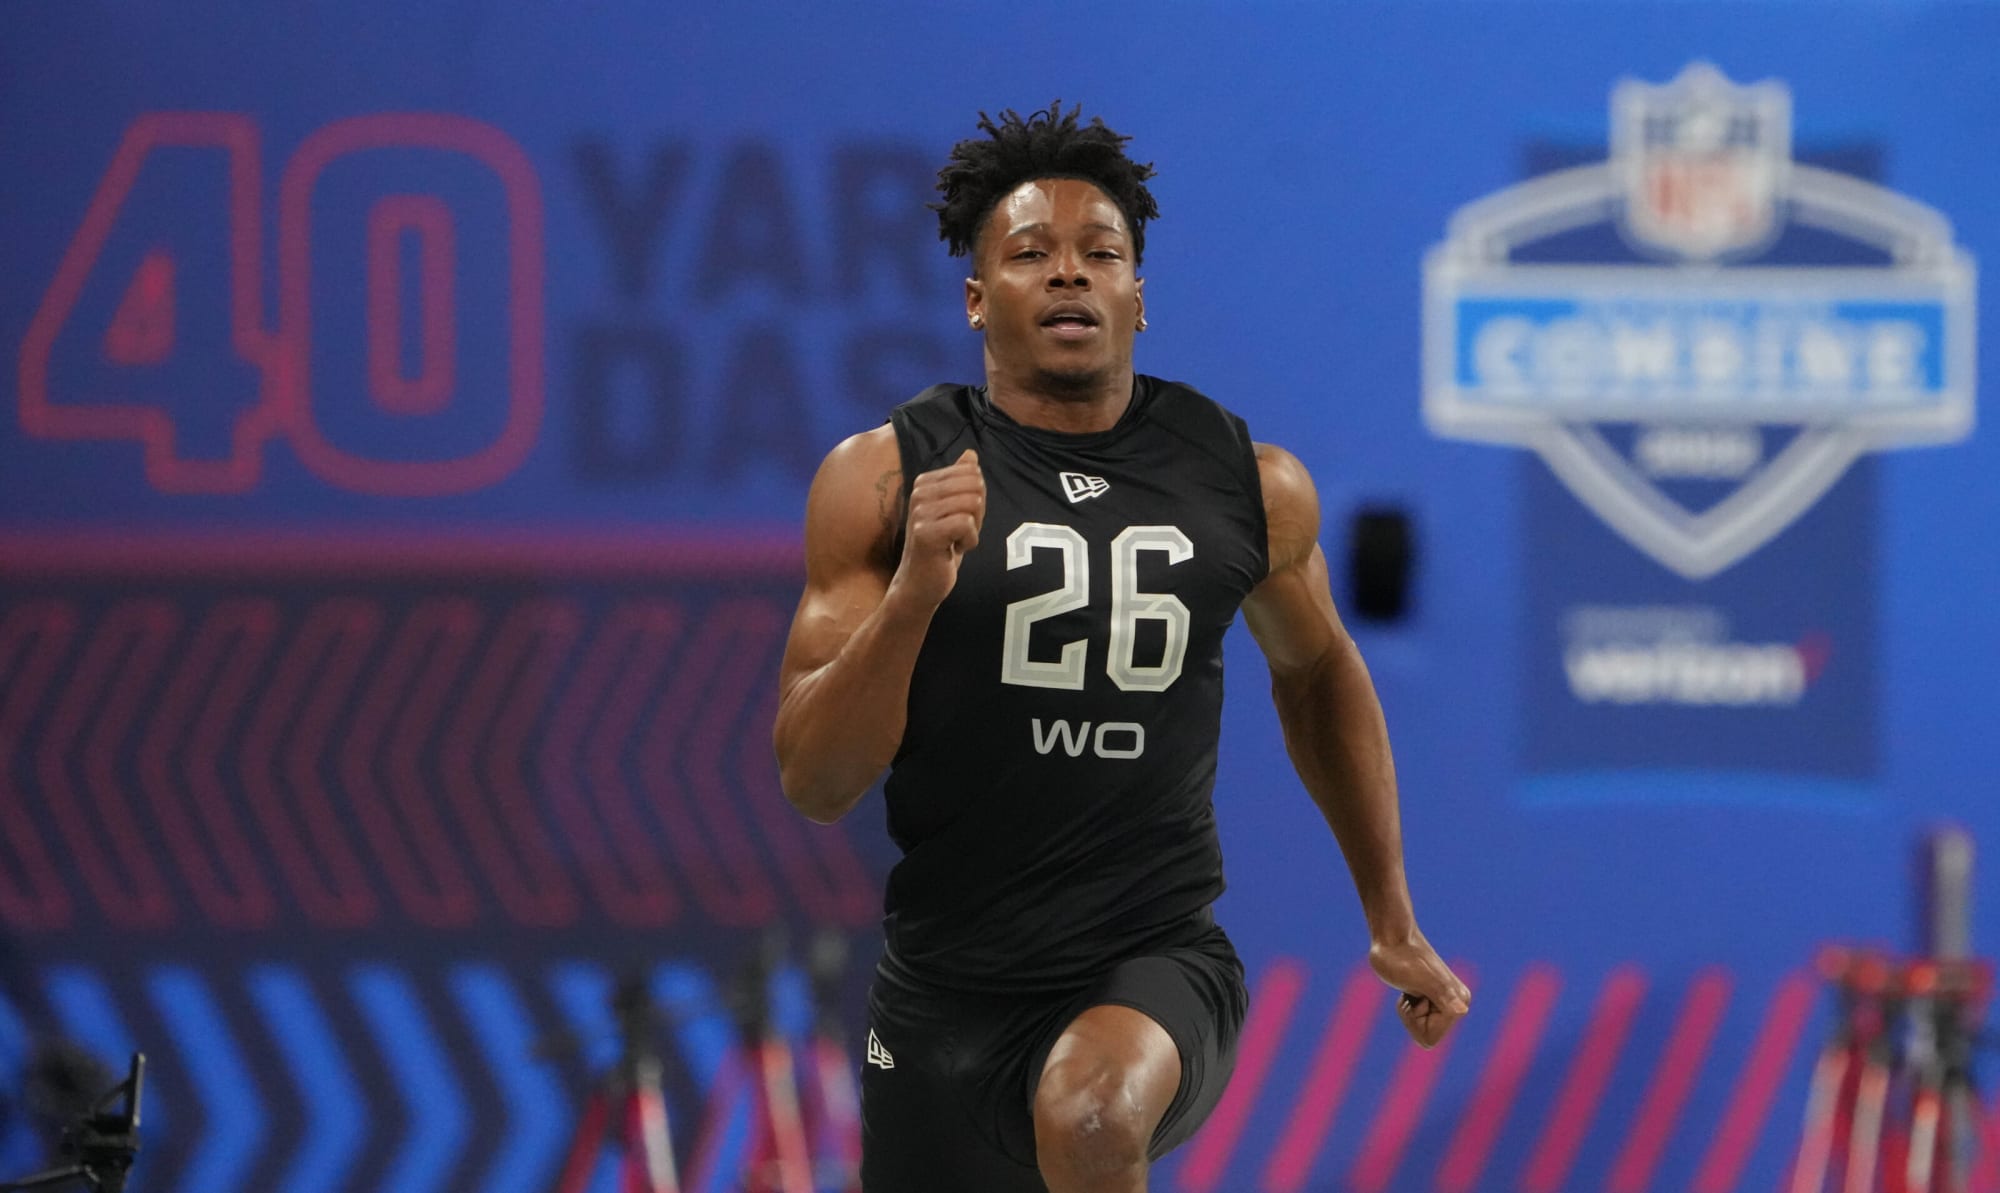 Charleston Rambo expected to move down NFL Draft board after